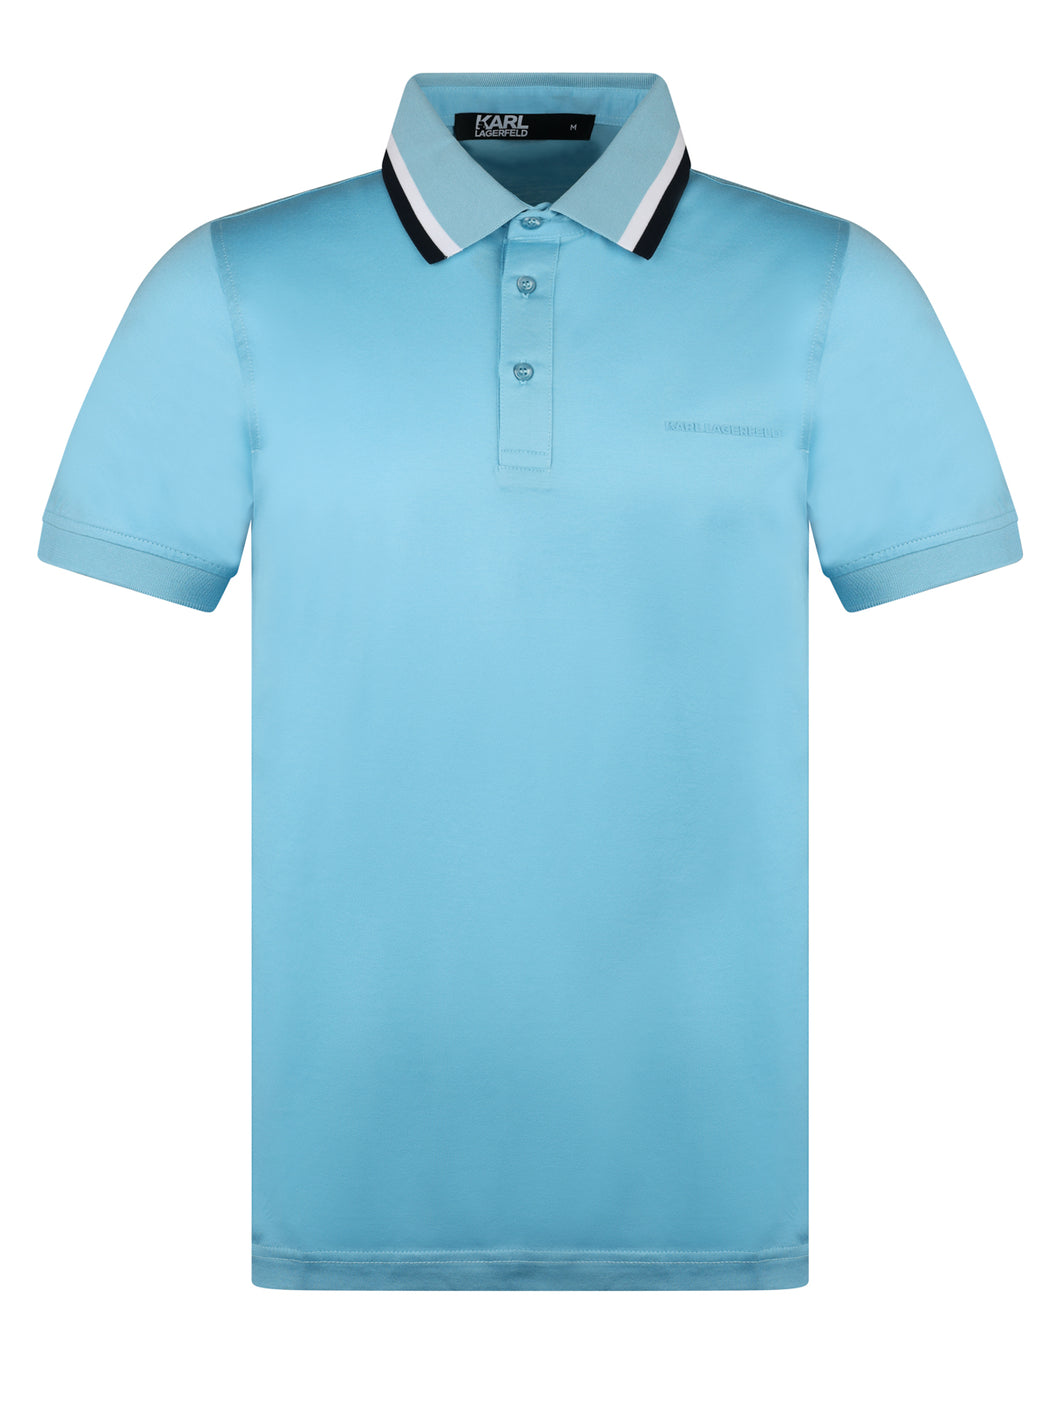 Lagerfeld Tipped Polo Shirt Sky